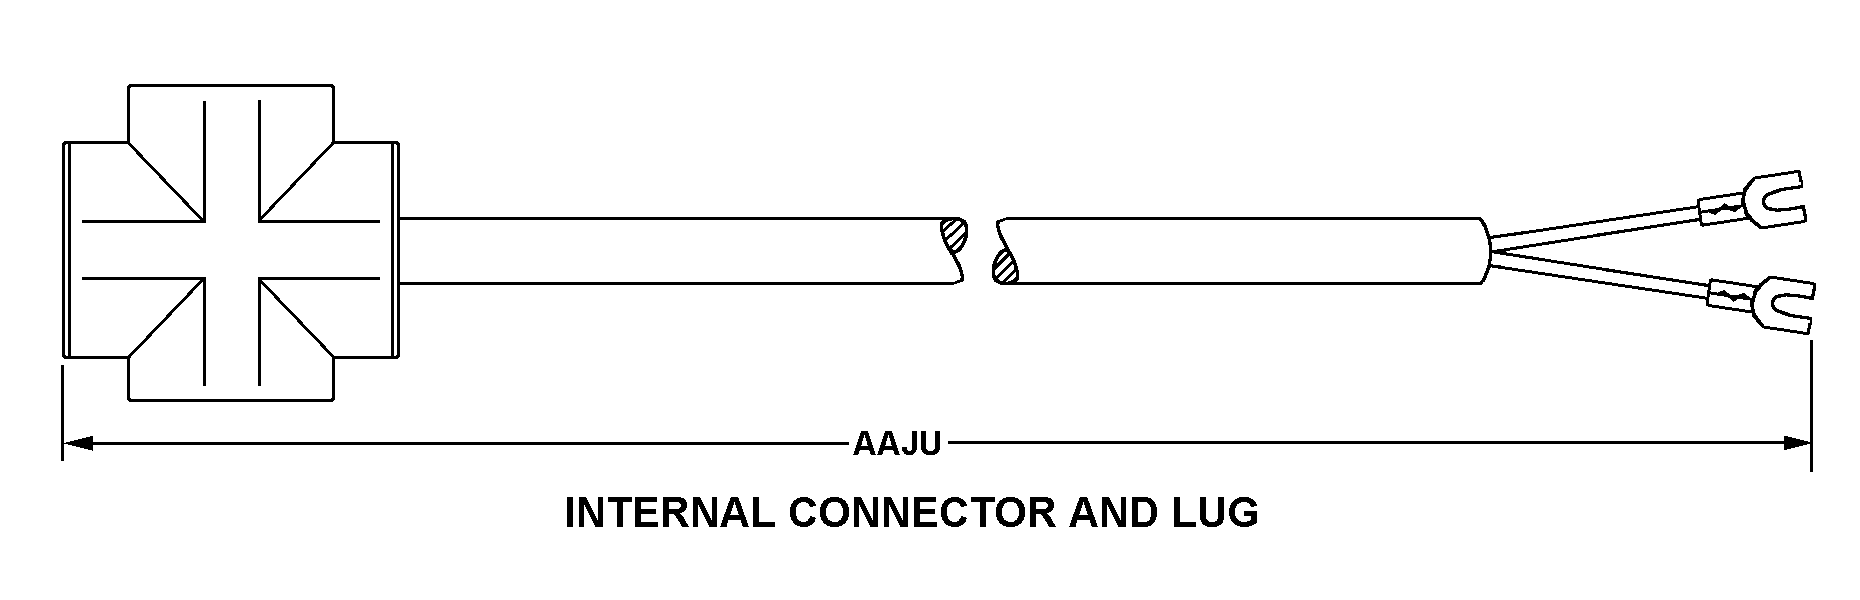 INTERNAL CONNECTOR AND LUG style nsn 6150-00-410-9880